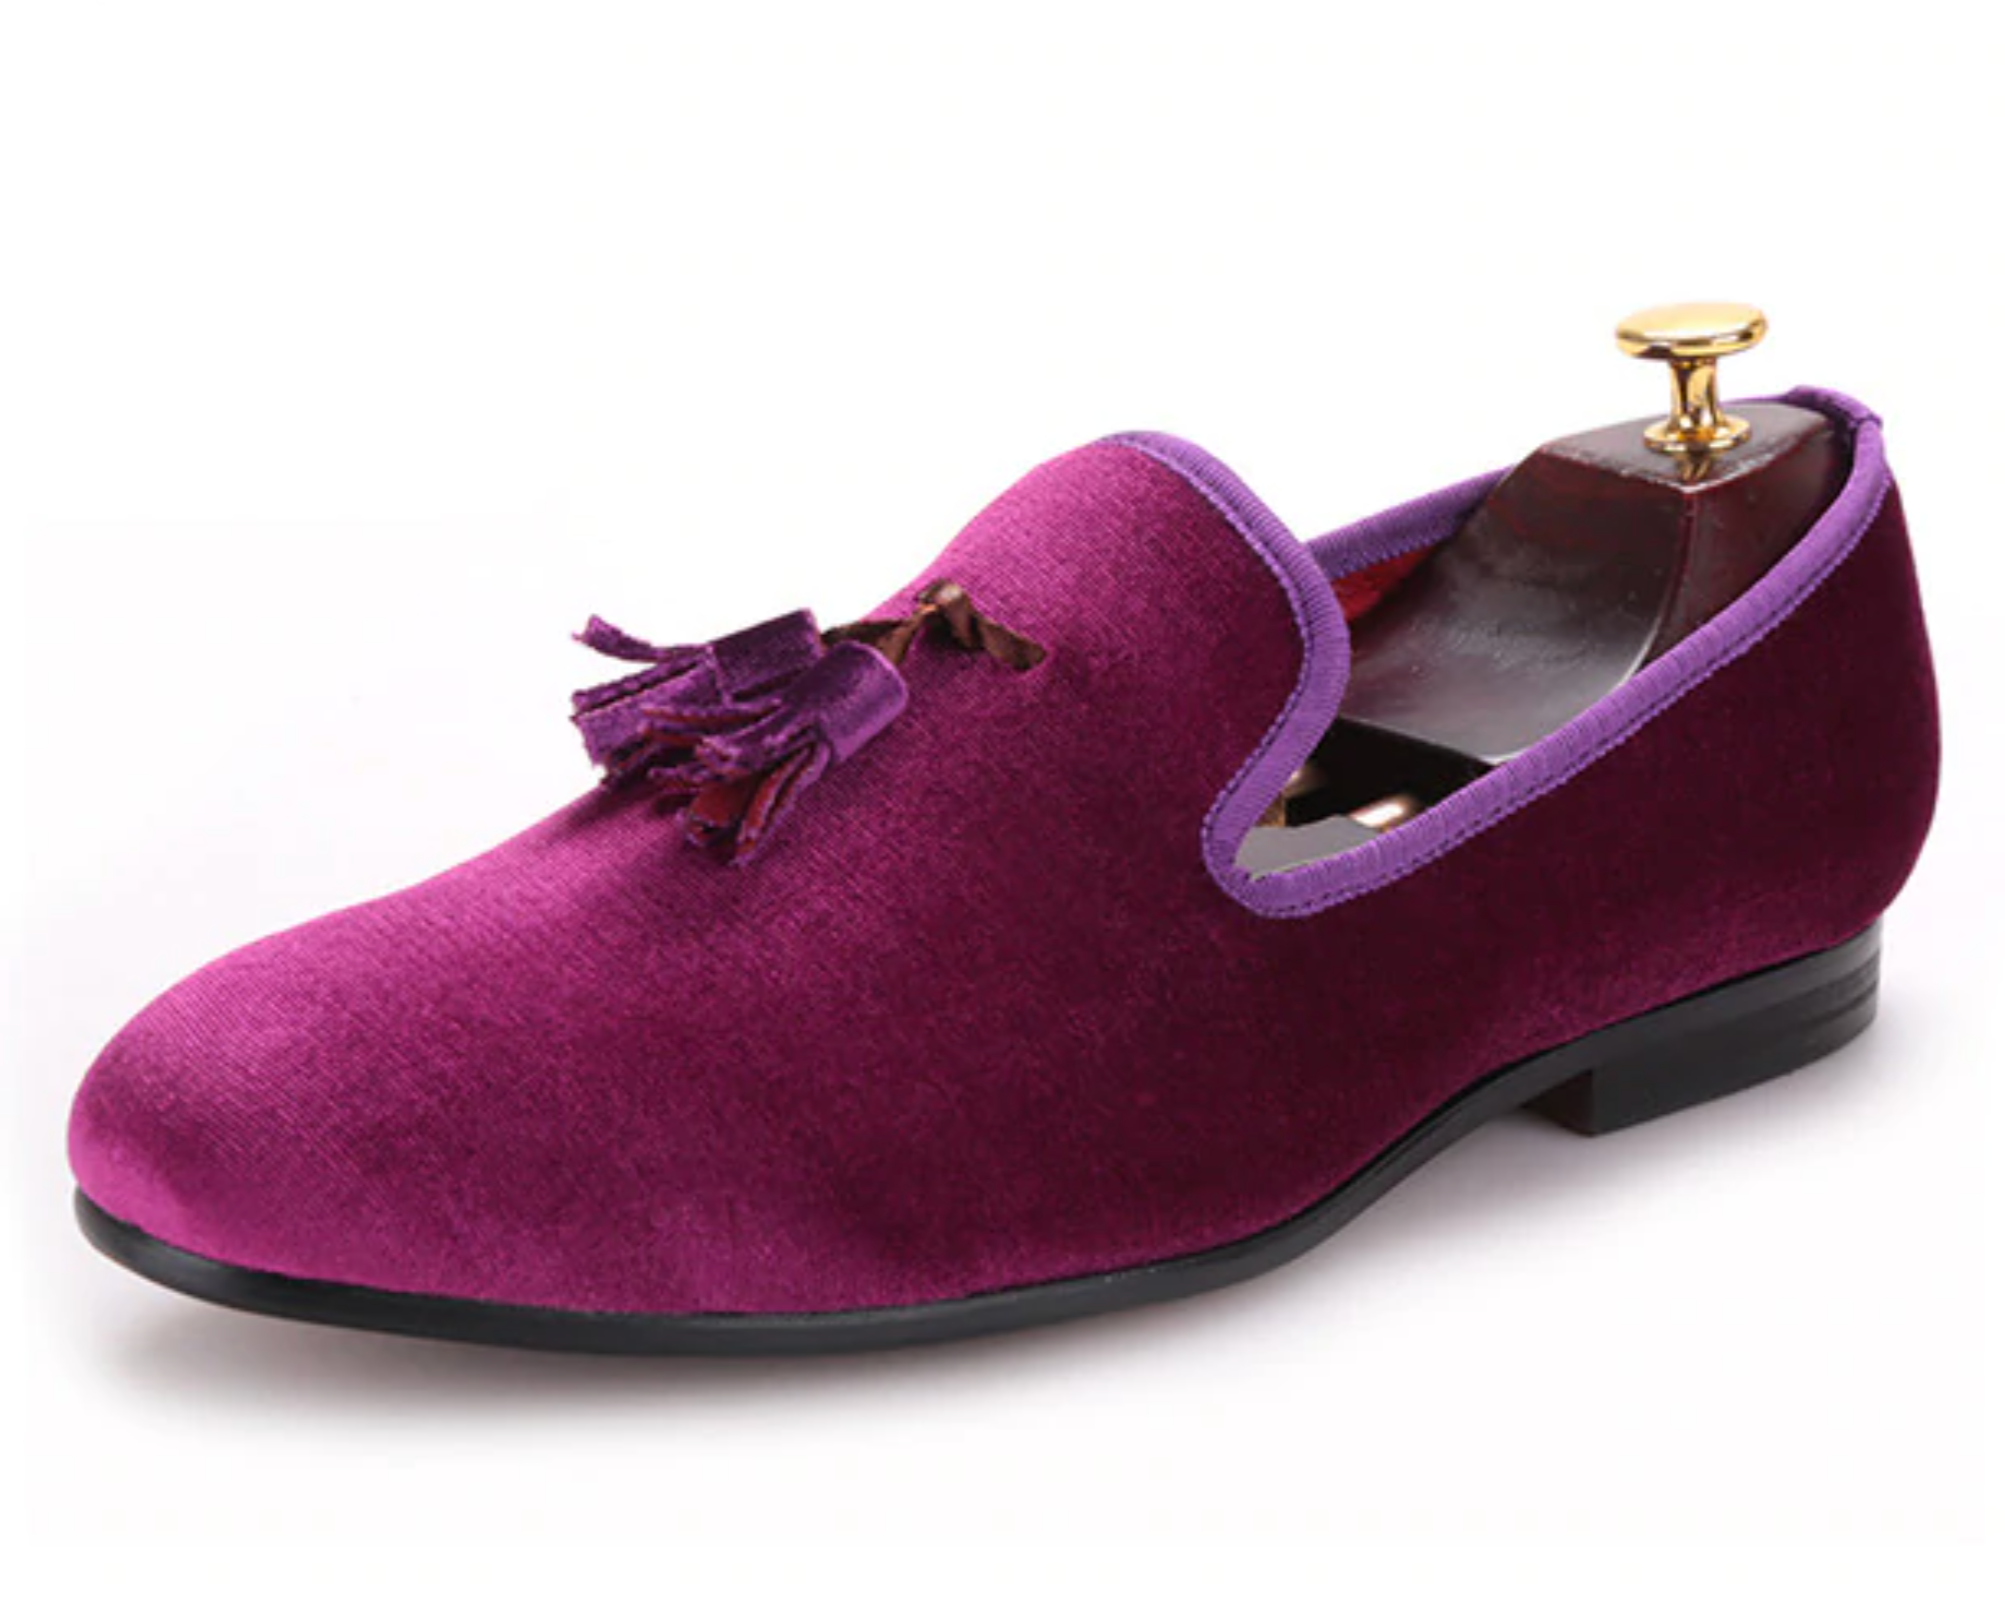 Plush magenta, velvet-look loafers with a quilted red fabric lining.